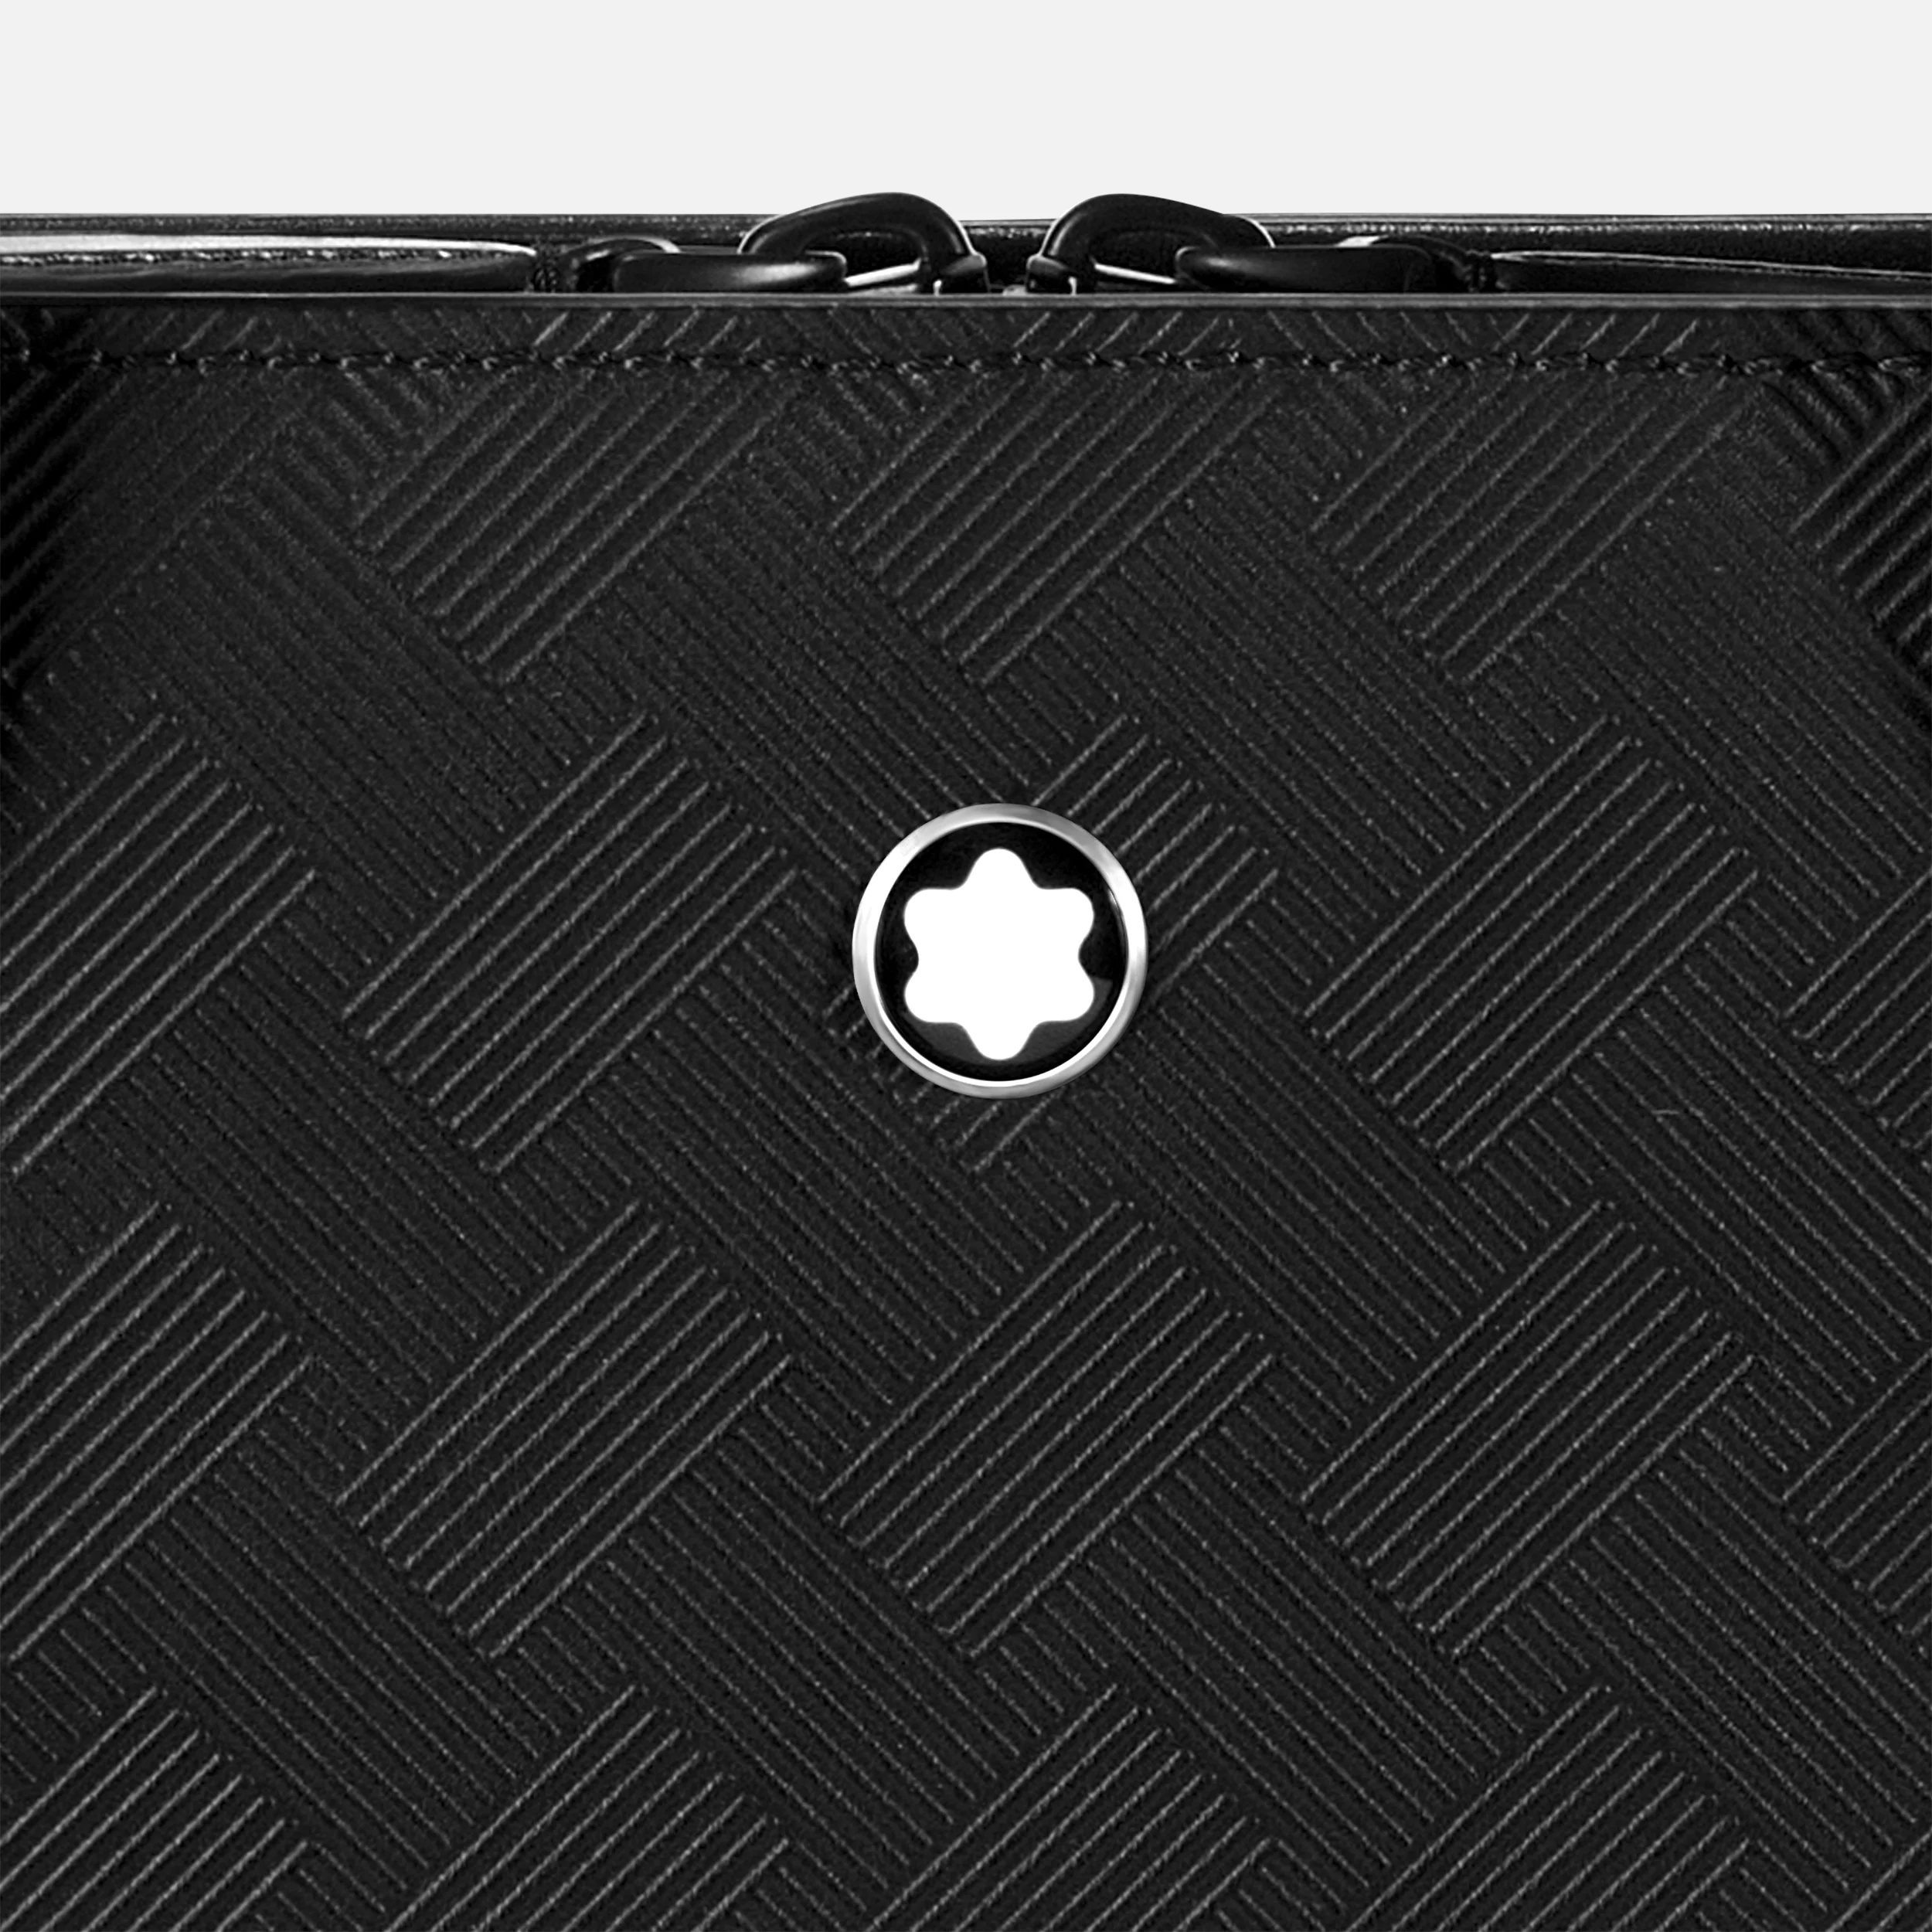 Montblanc Extreme 3.0 Thin Document Case Black - Pencraft the boutique